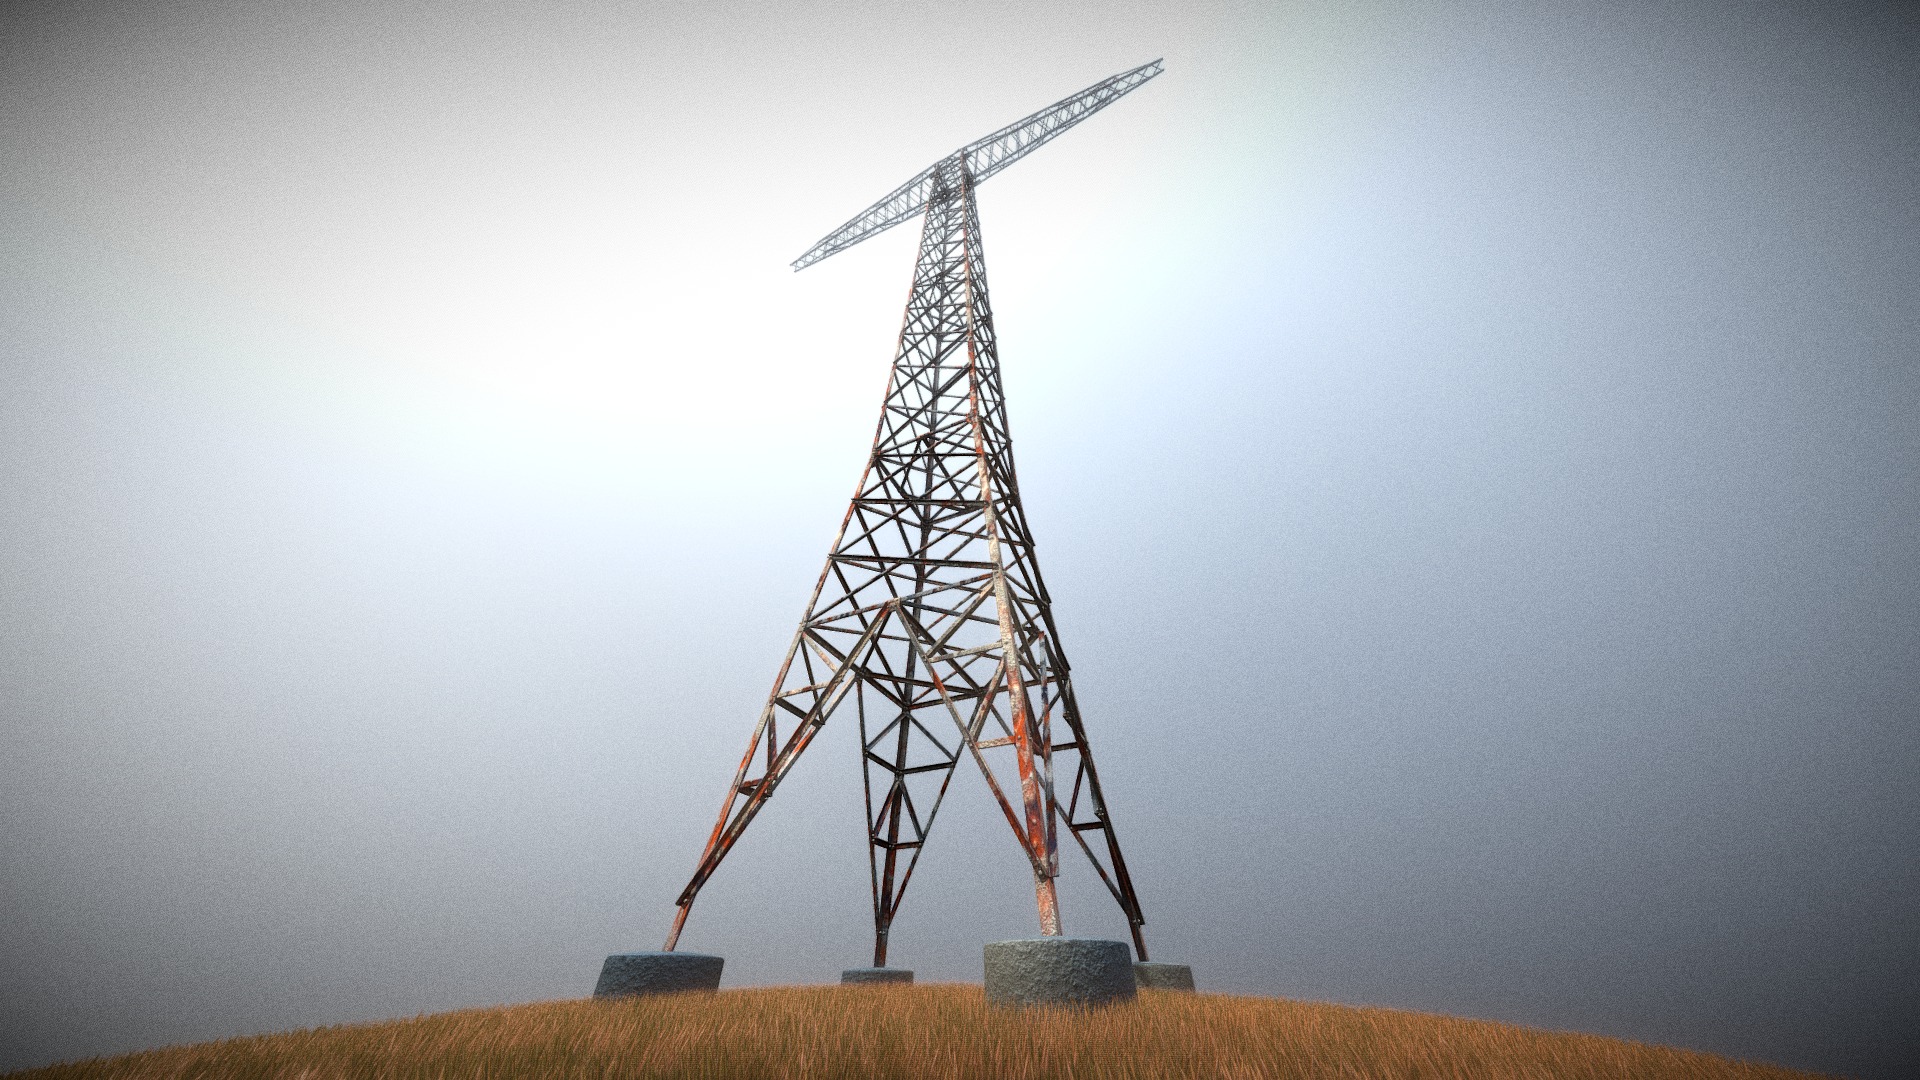 3D model Transmission Tower 32 Meter Rusty Version - This is a 3D model of the Transmission Tower 32 Meter Rusty Version. The 3D model is about a tower on a hill.